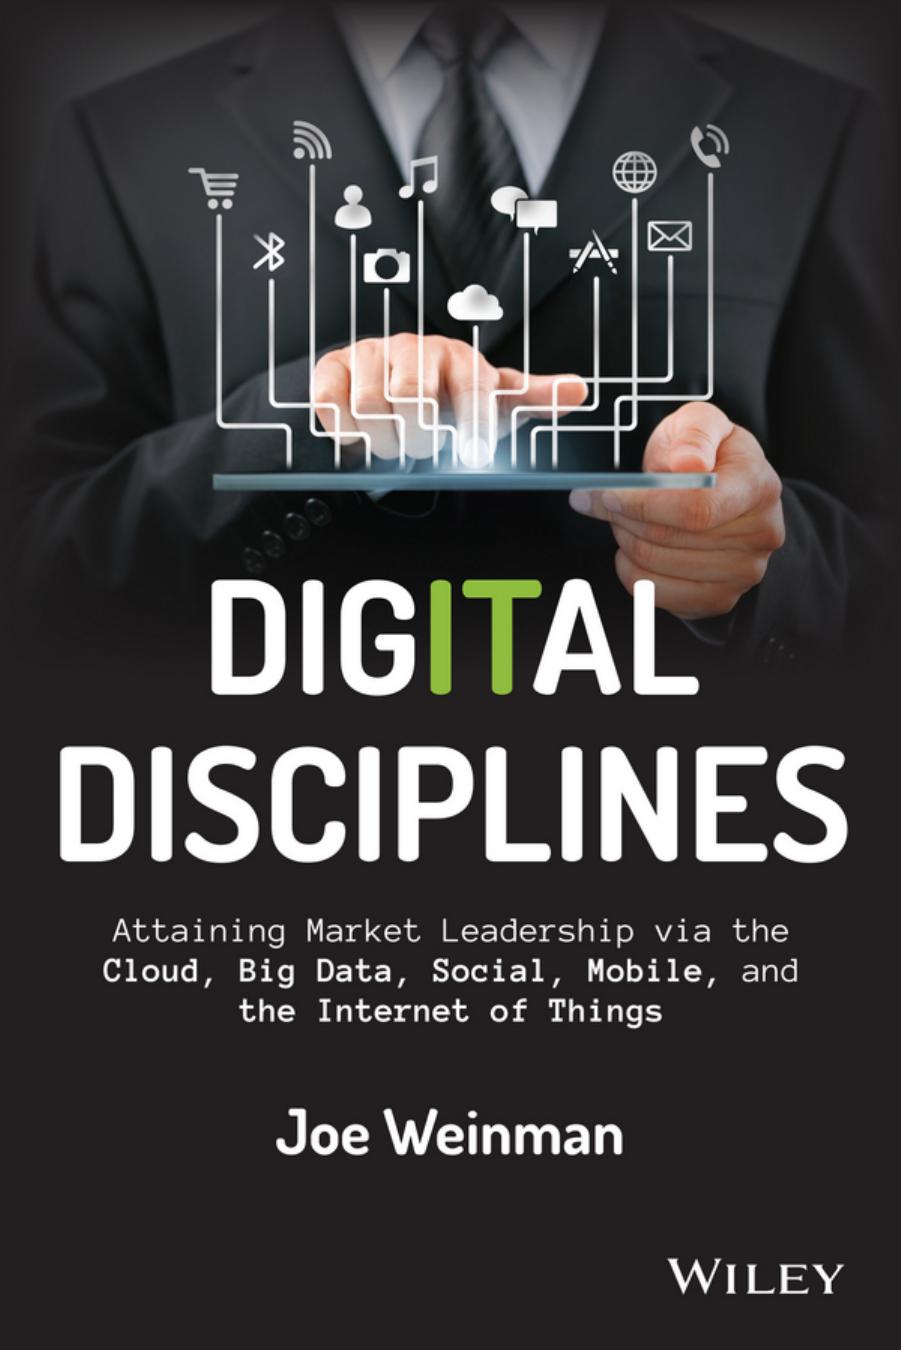 Digital Disciplines: Attaining Market Leadership via the Cloud, Big Data, Social, Mobile, and the Internet of Things